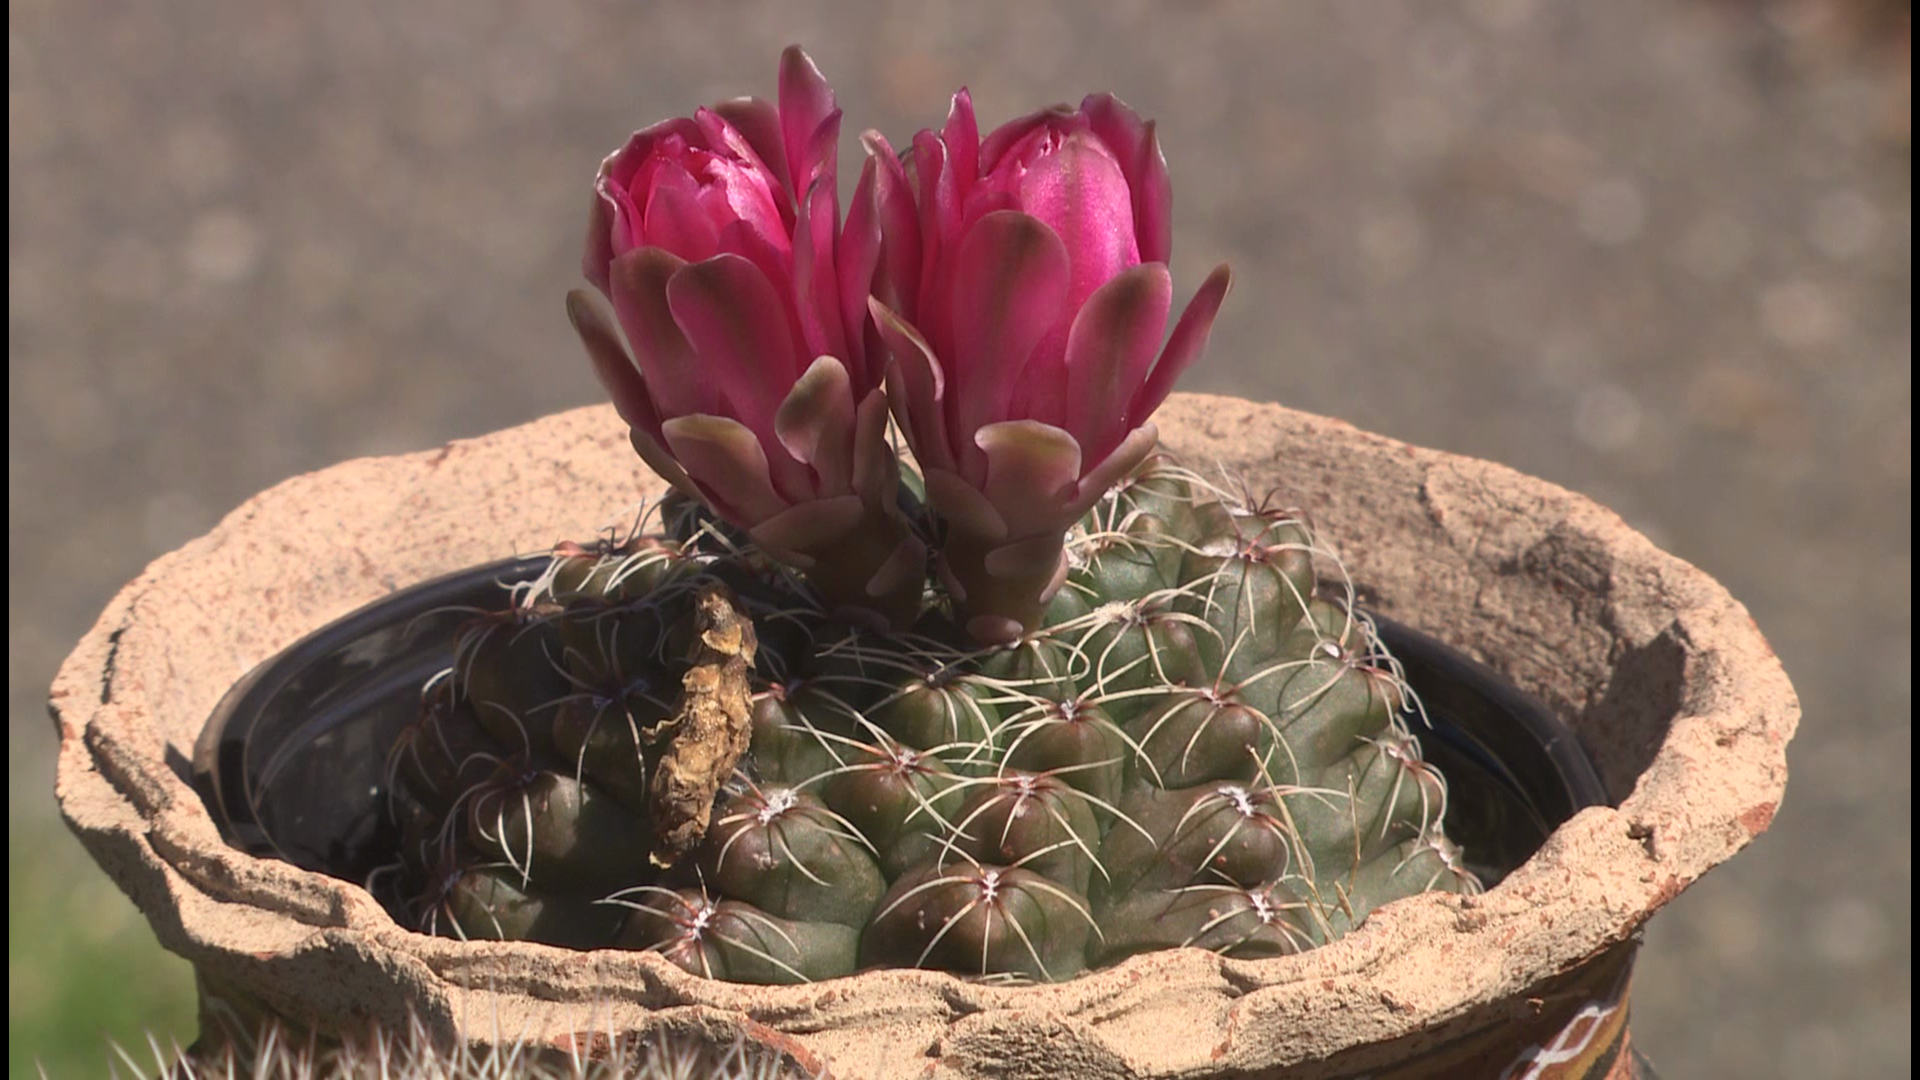 Make your cacti flower with joy with these tips from gardening guru Ciscoe Morris